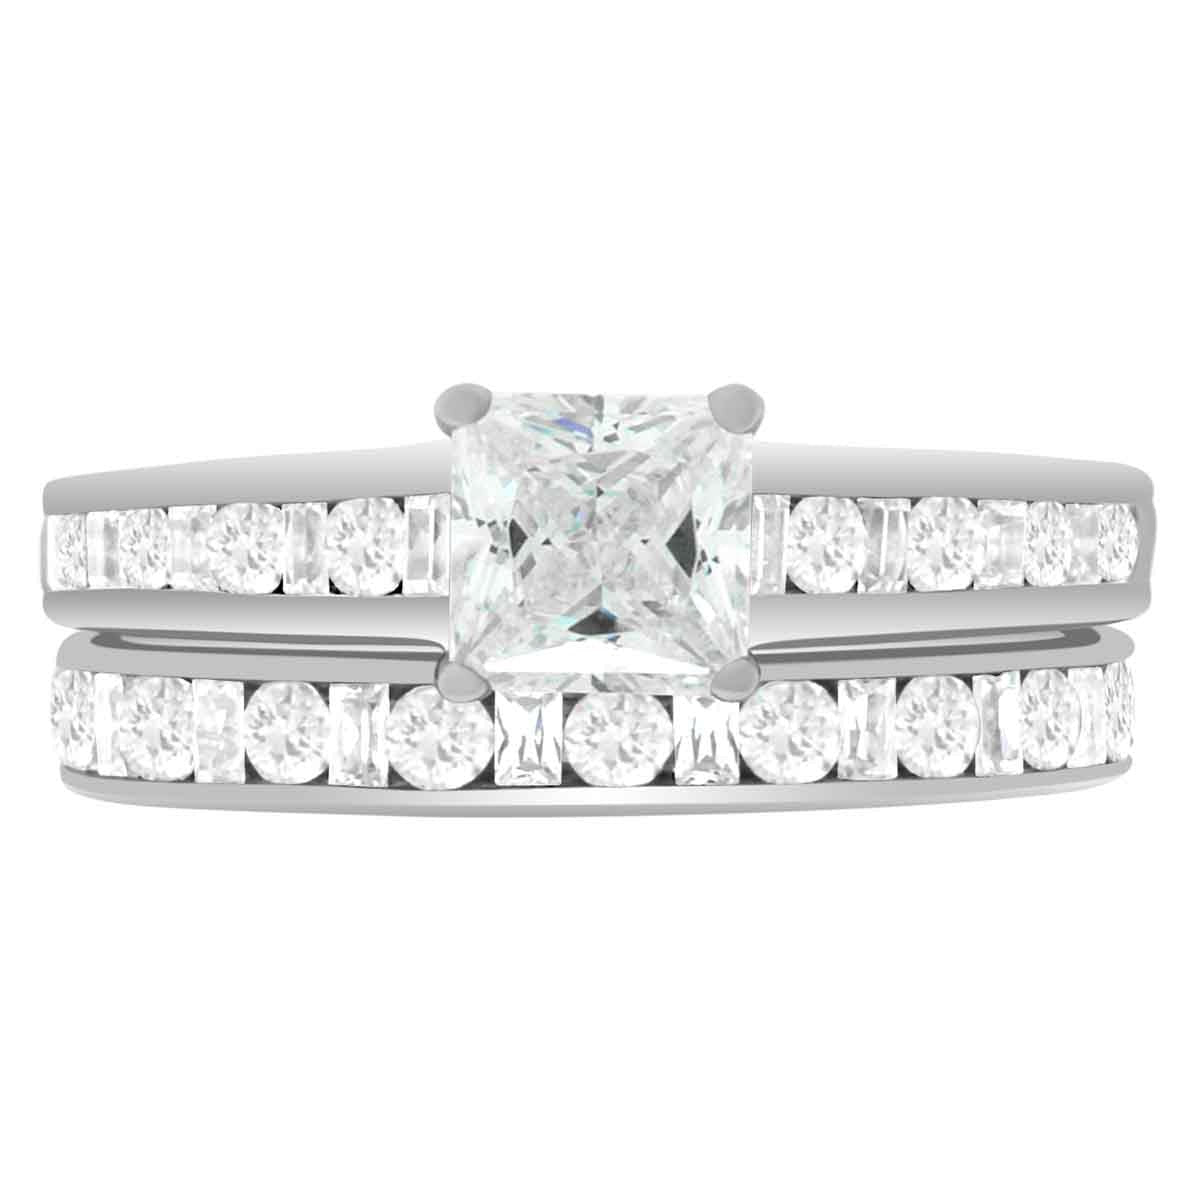 Fancy Cut Diamond Ring made from white gold pictured with a diamond set wedding ring